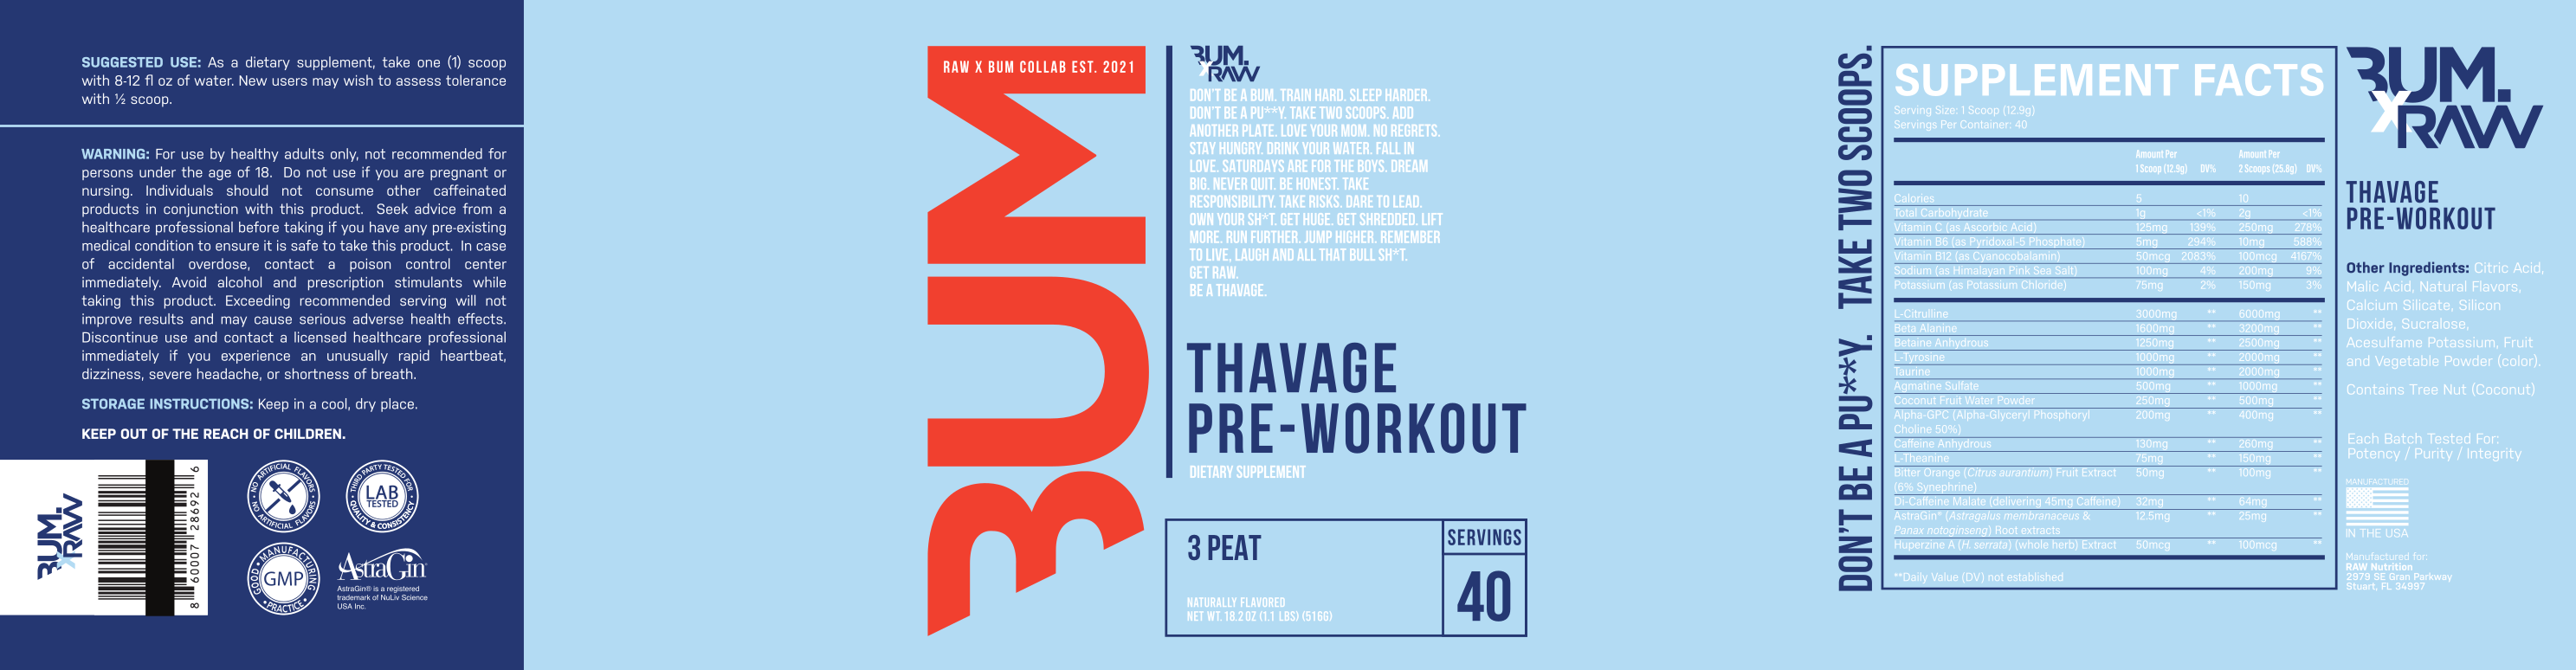 Raw Nutrition Thavage Pre-Workout 3 Peat Label